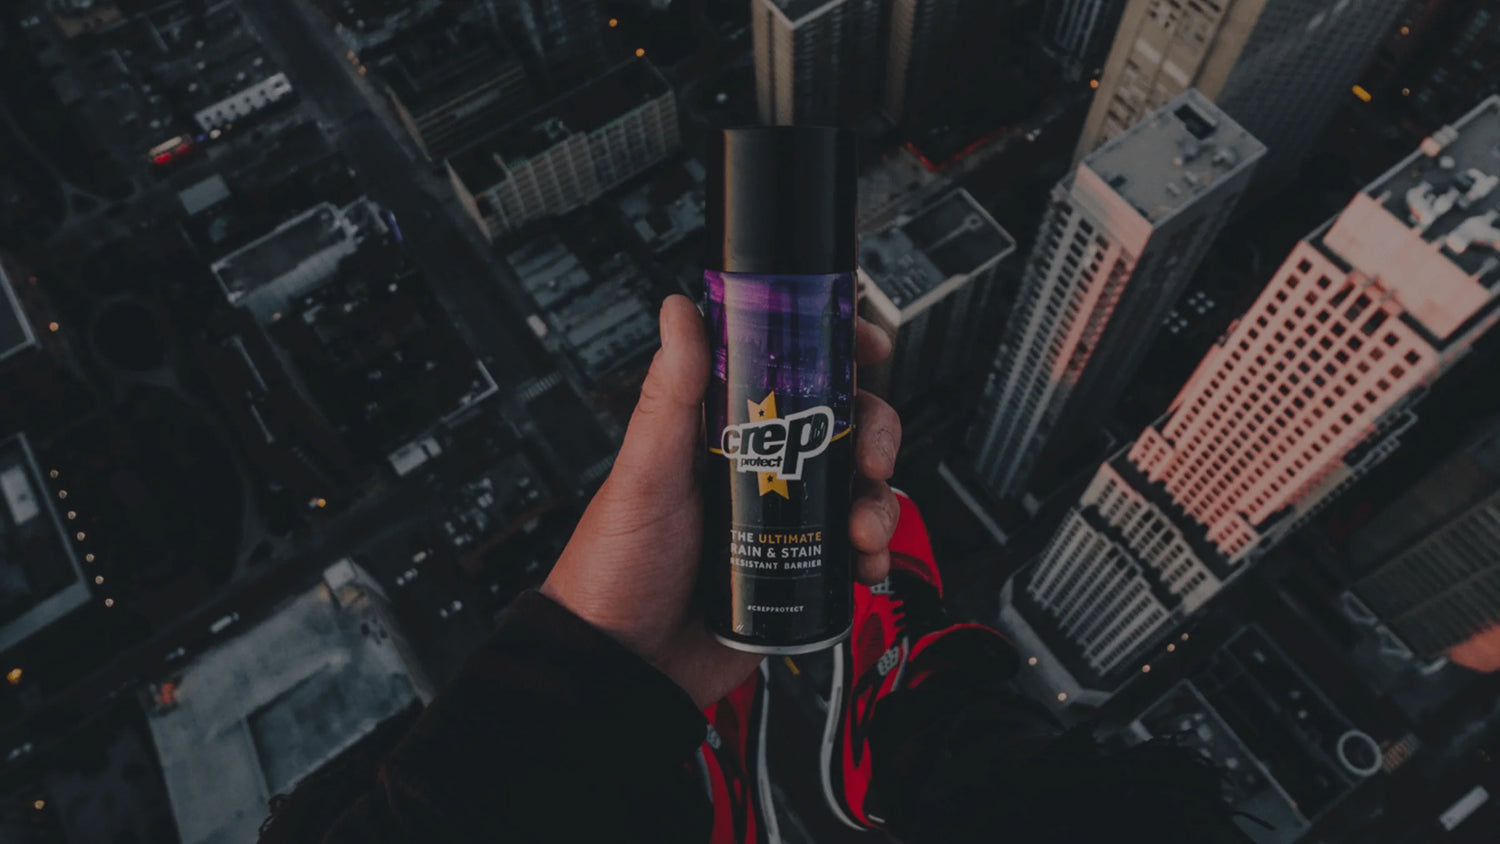 Crep Protect India (@crepprotect_india) • Instagram photos and videos